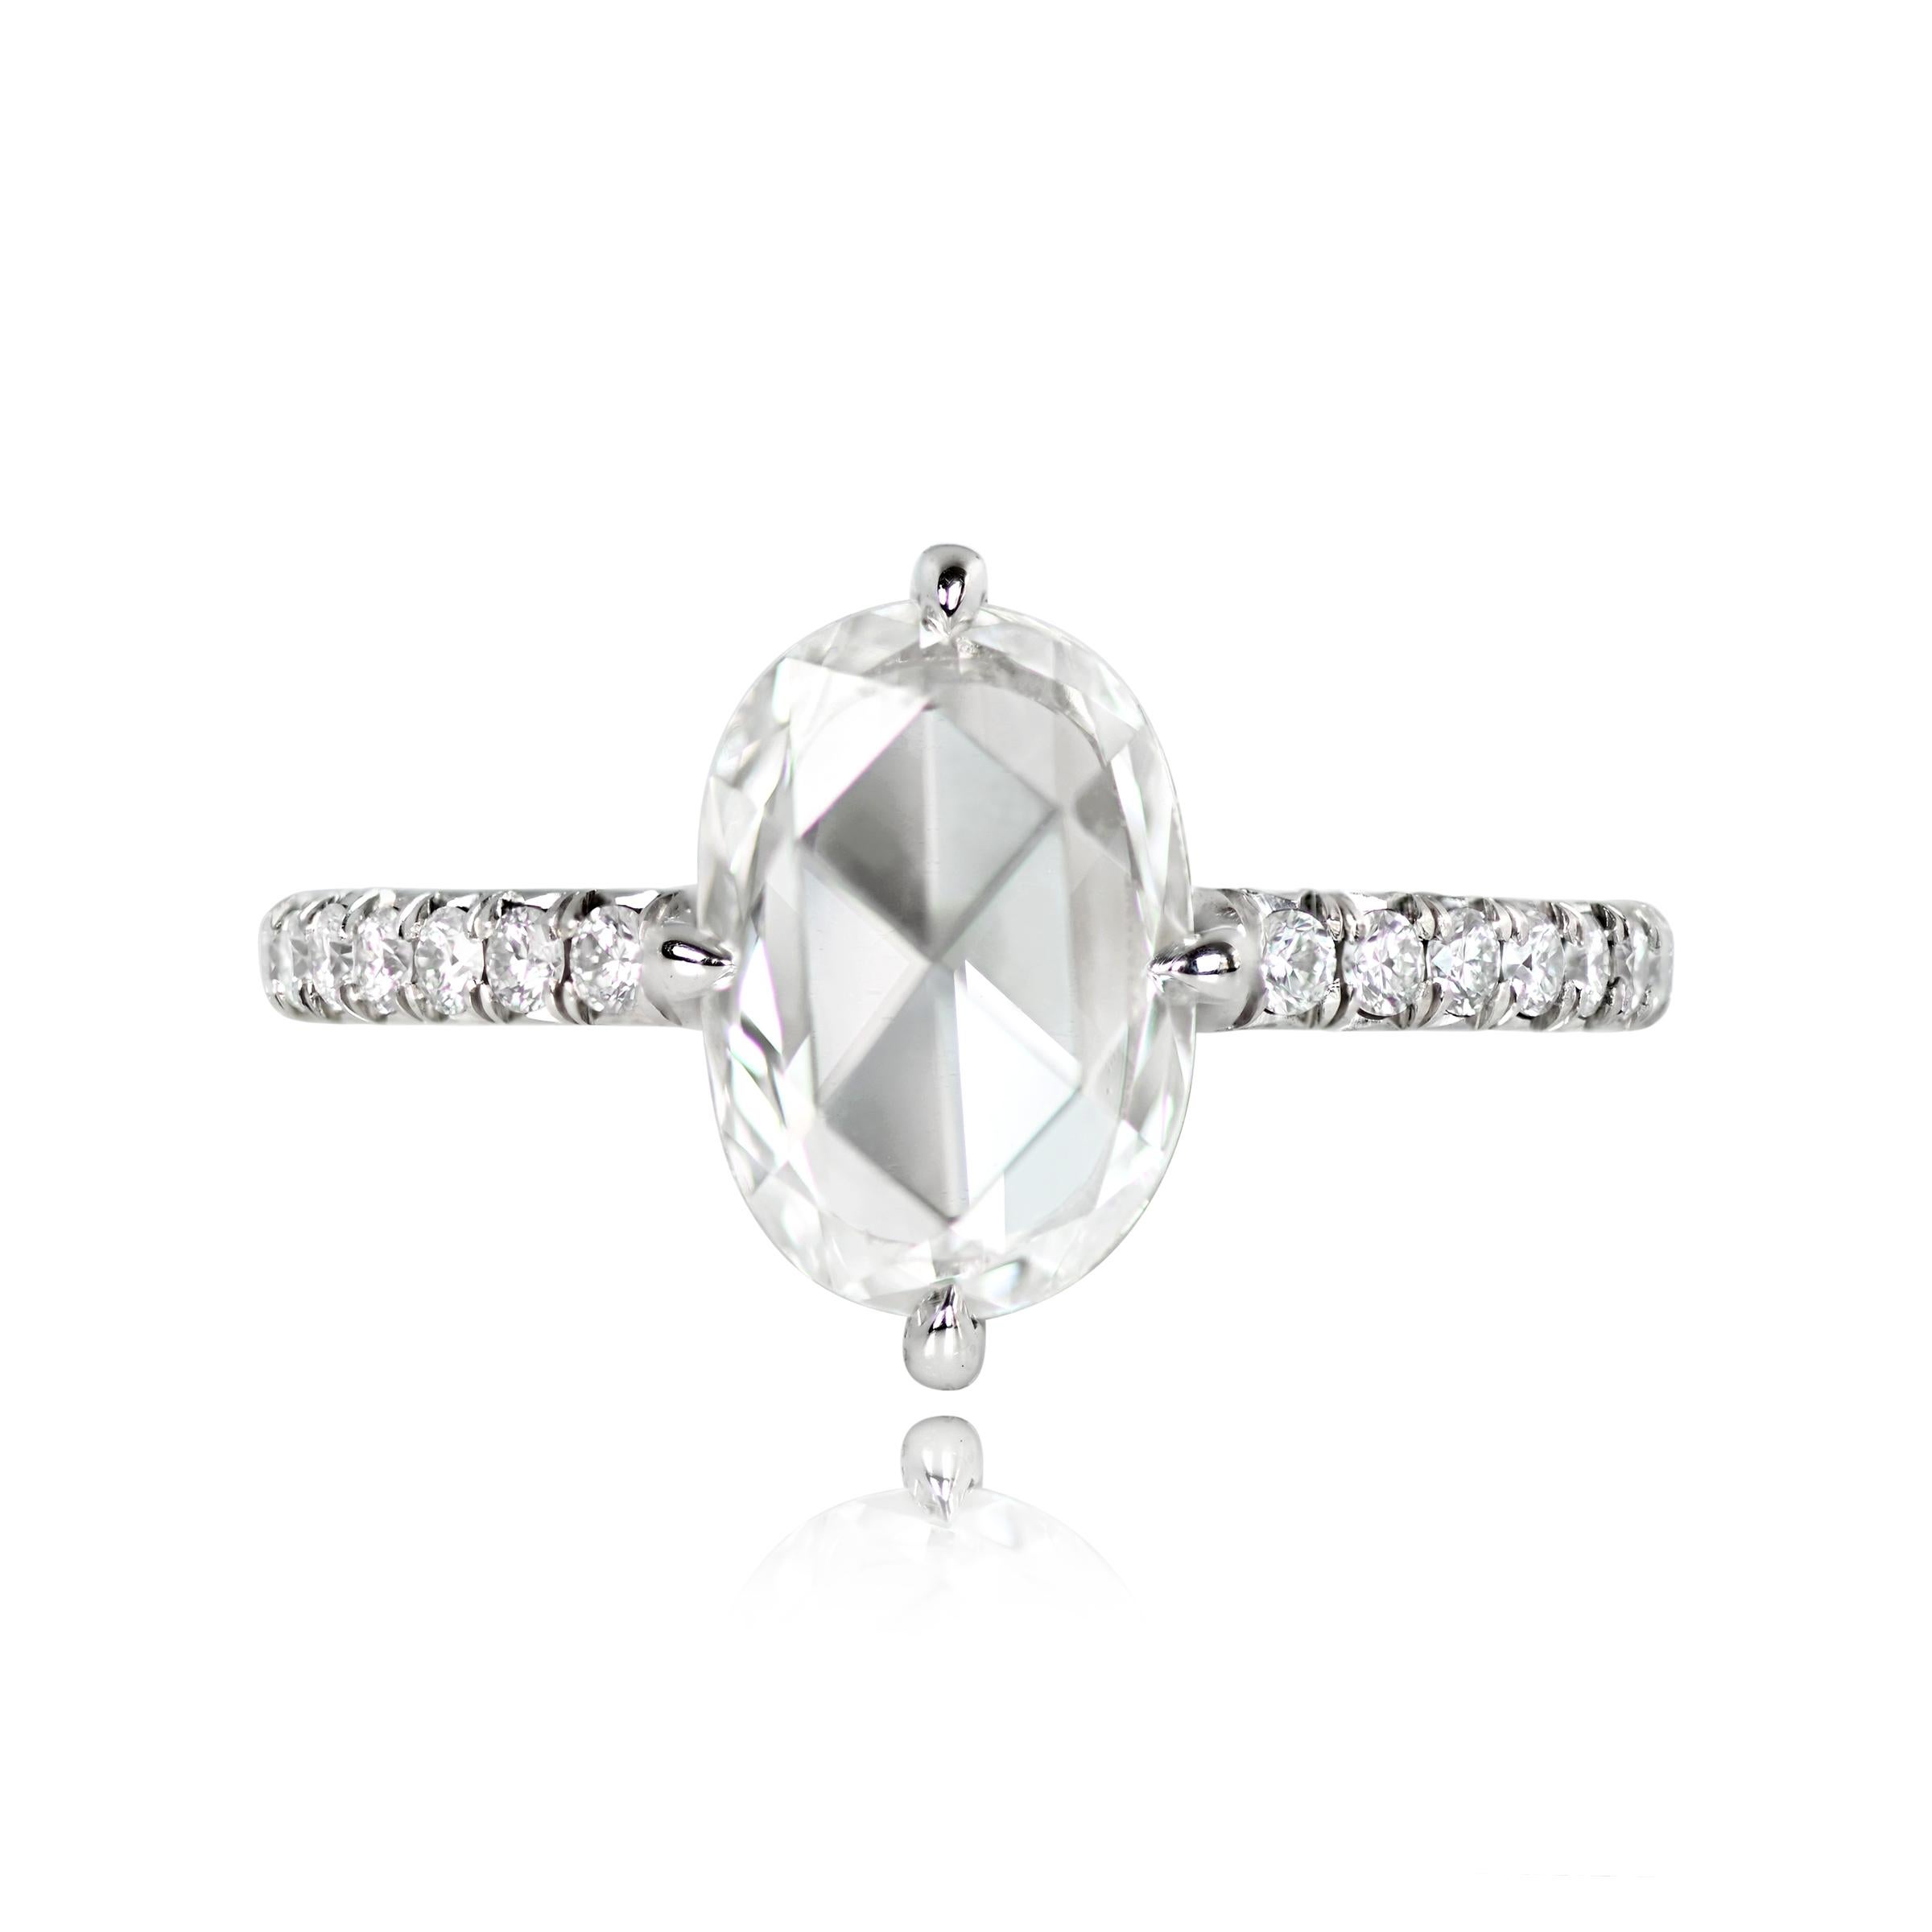 Platinum diamond solitaire ring with GIA-certified 1.35-carat oval rose cut center diamond in prongs. Micro-pave round brilliant cut diamonds adorn the shoulders and shank. Additional round brilliant cut diamonds are set in the under-gallery. E